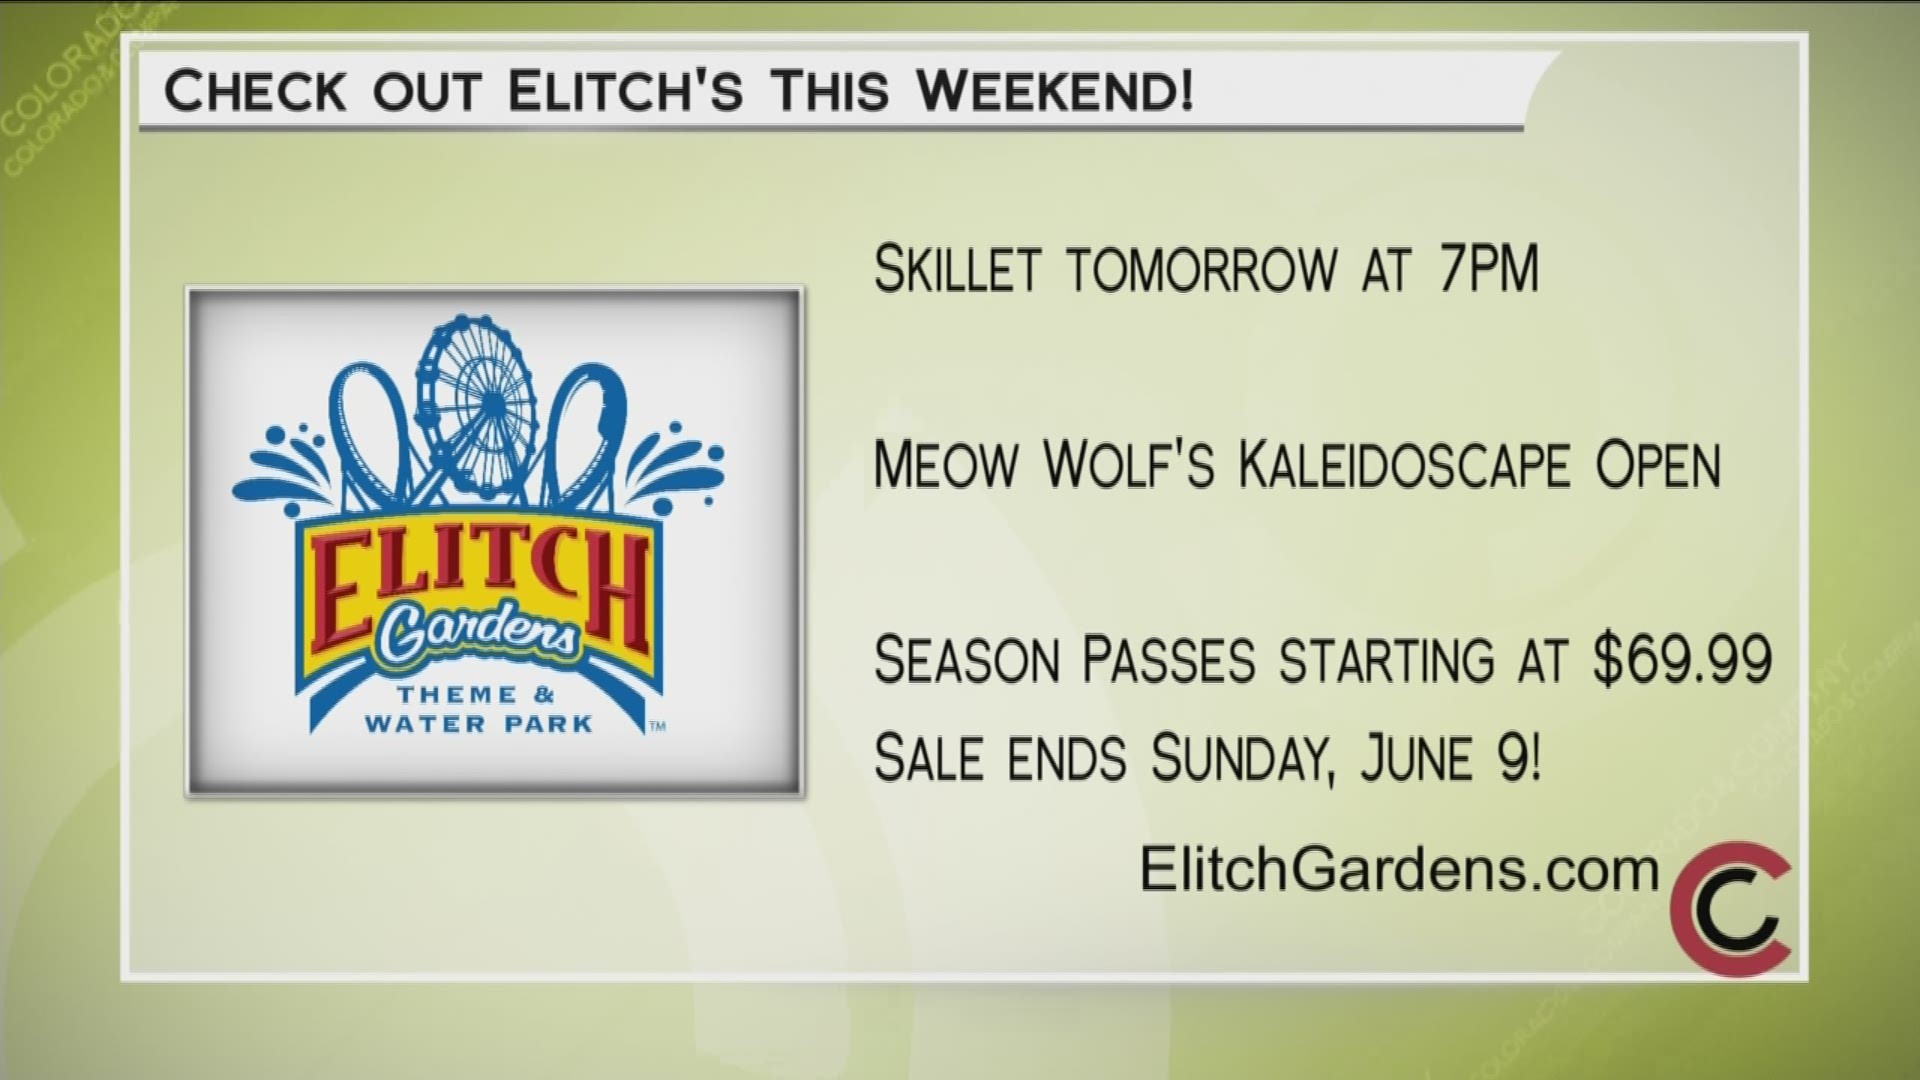 There’s only a few days left to take advantage of $69.99 season passes at Elitch Gardens! The offer ends on June 9th. Learn more about Elitch Gardens and get your tickets today at www.ElitchGardens.com. 
THIS INTERVIEW HAS COMMERCIAL CONTENT. PRODUCTS AND SERVICES FEATURED APPEAR AS PAID ADVERTISING.